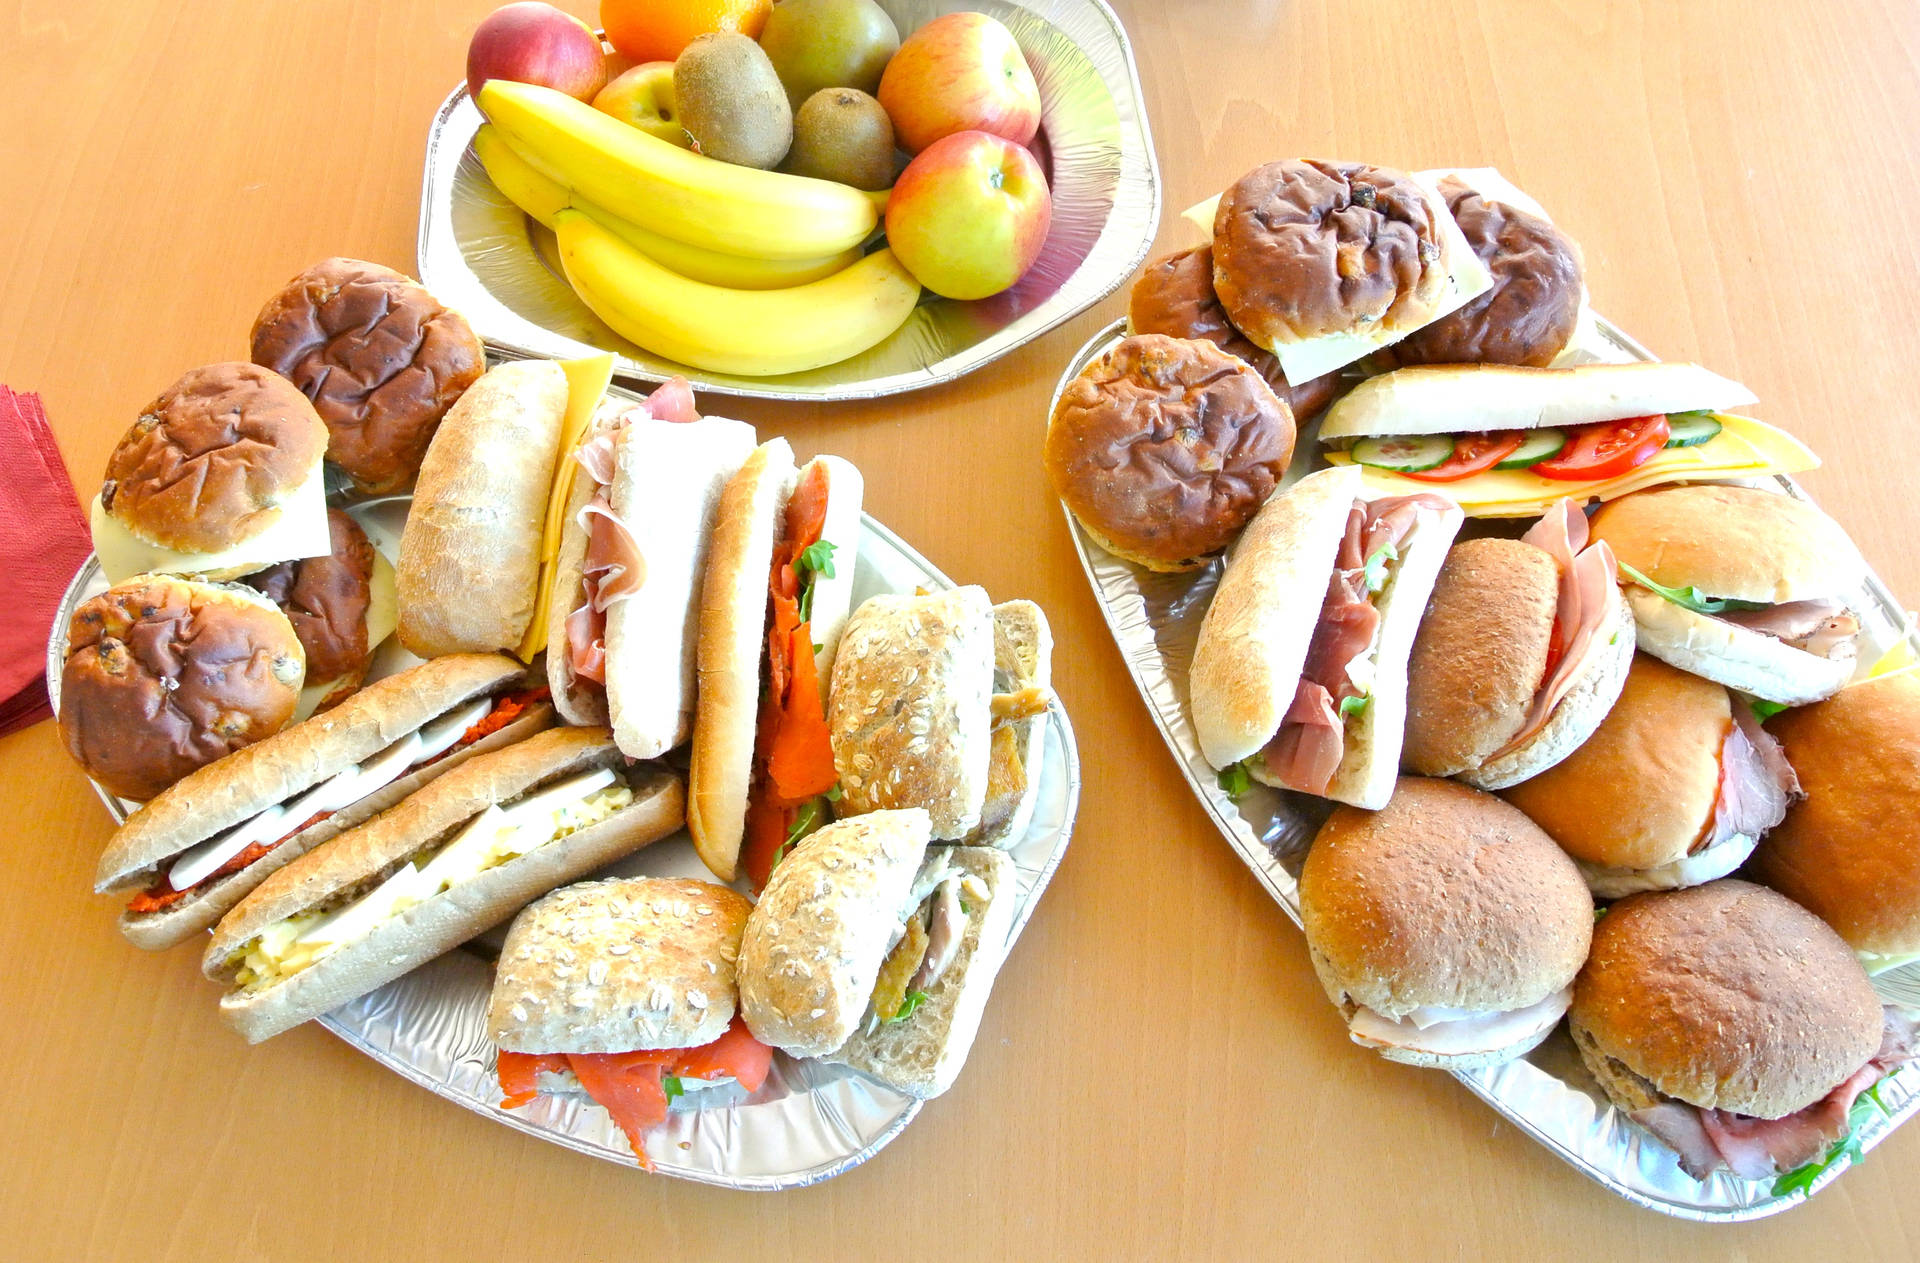 Caption: Savoring A Healthy Lunch: Sandwich Platter And Fruits Background